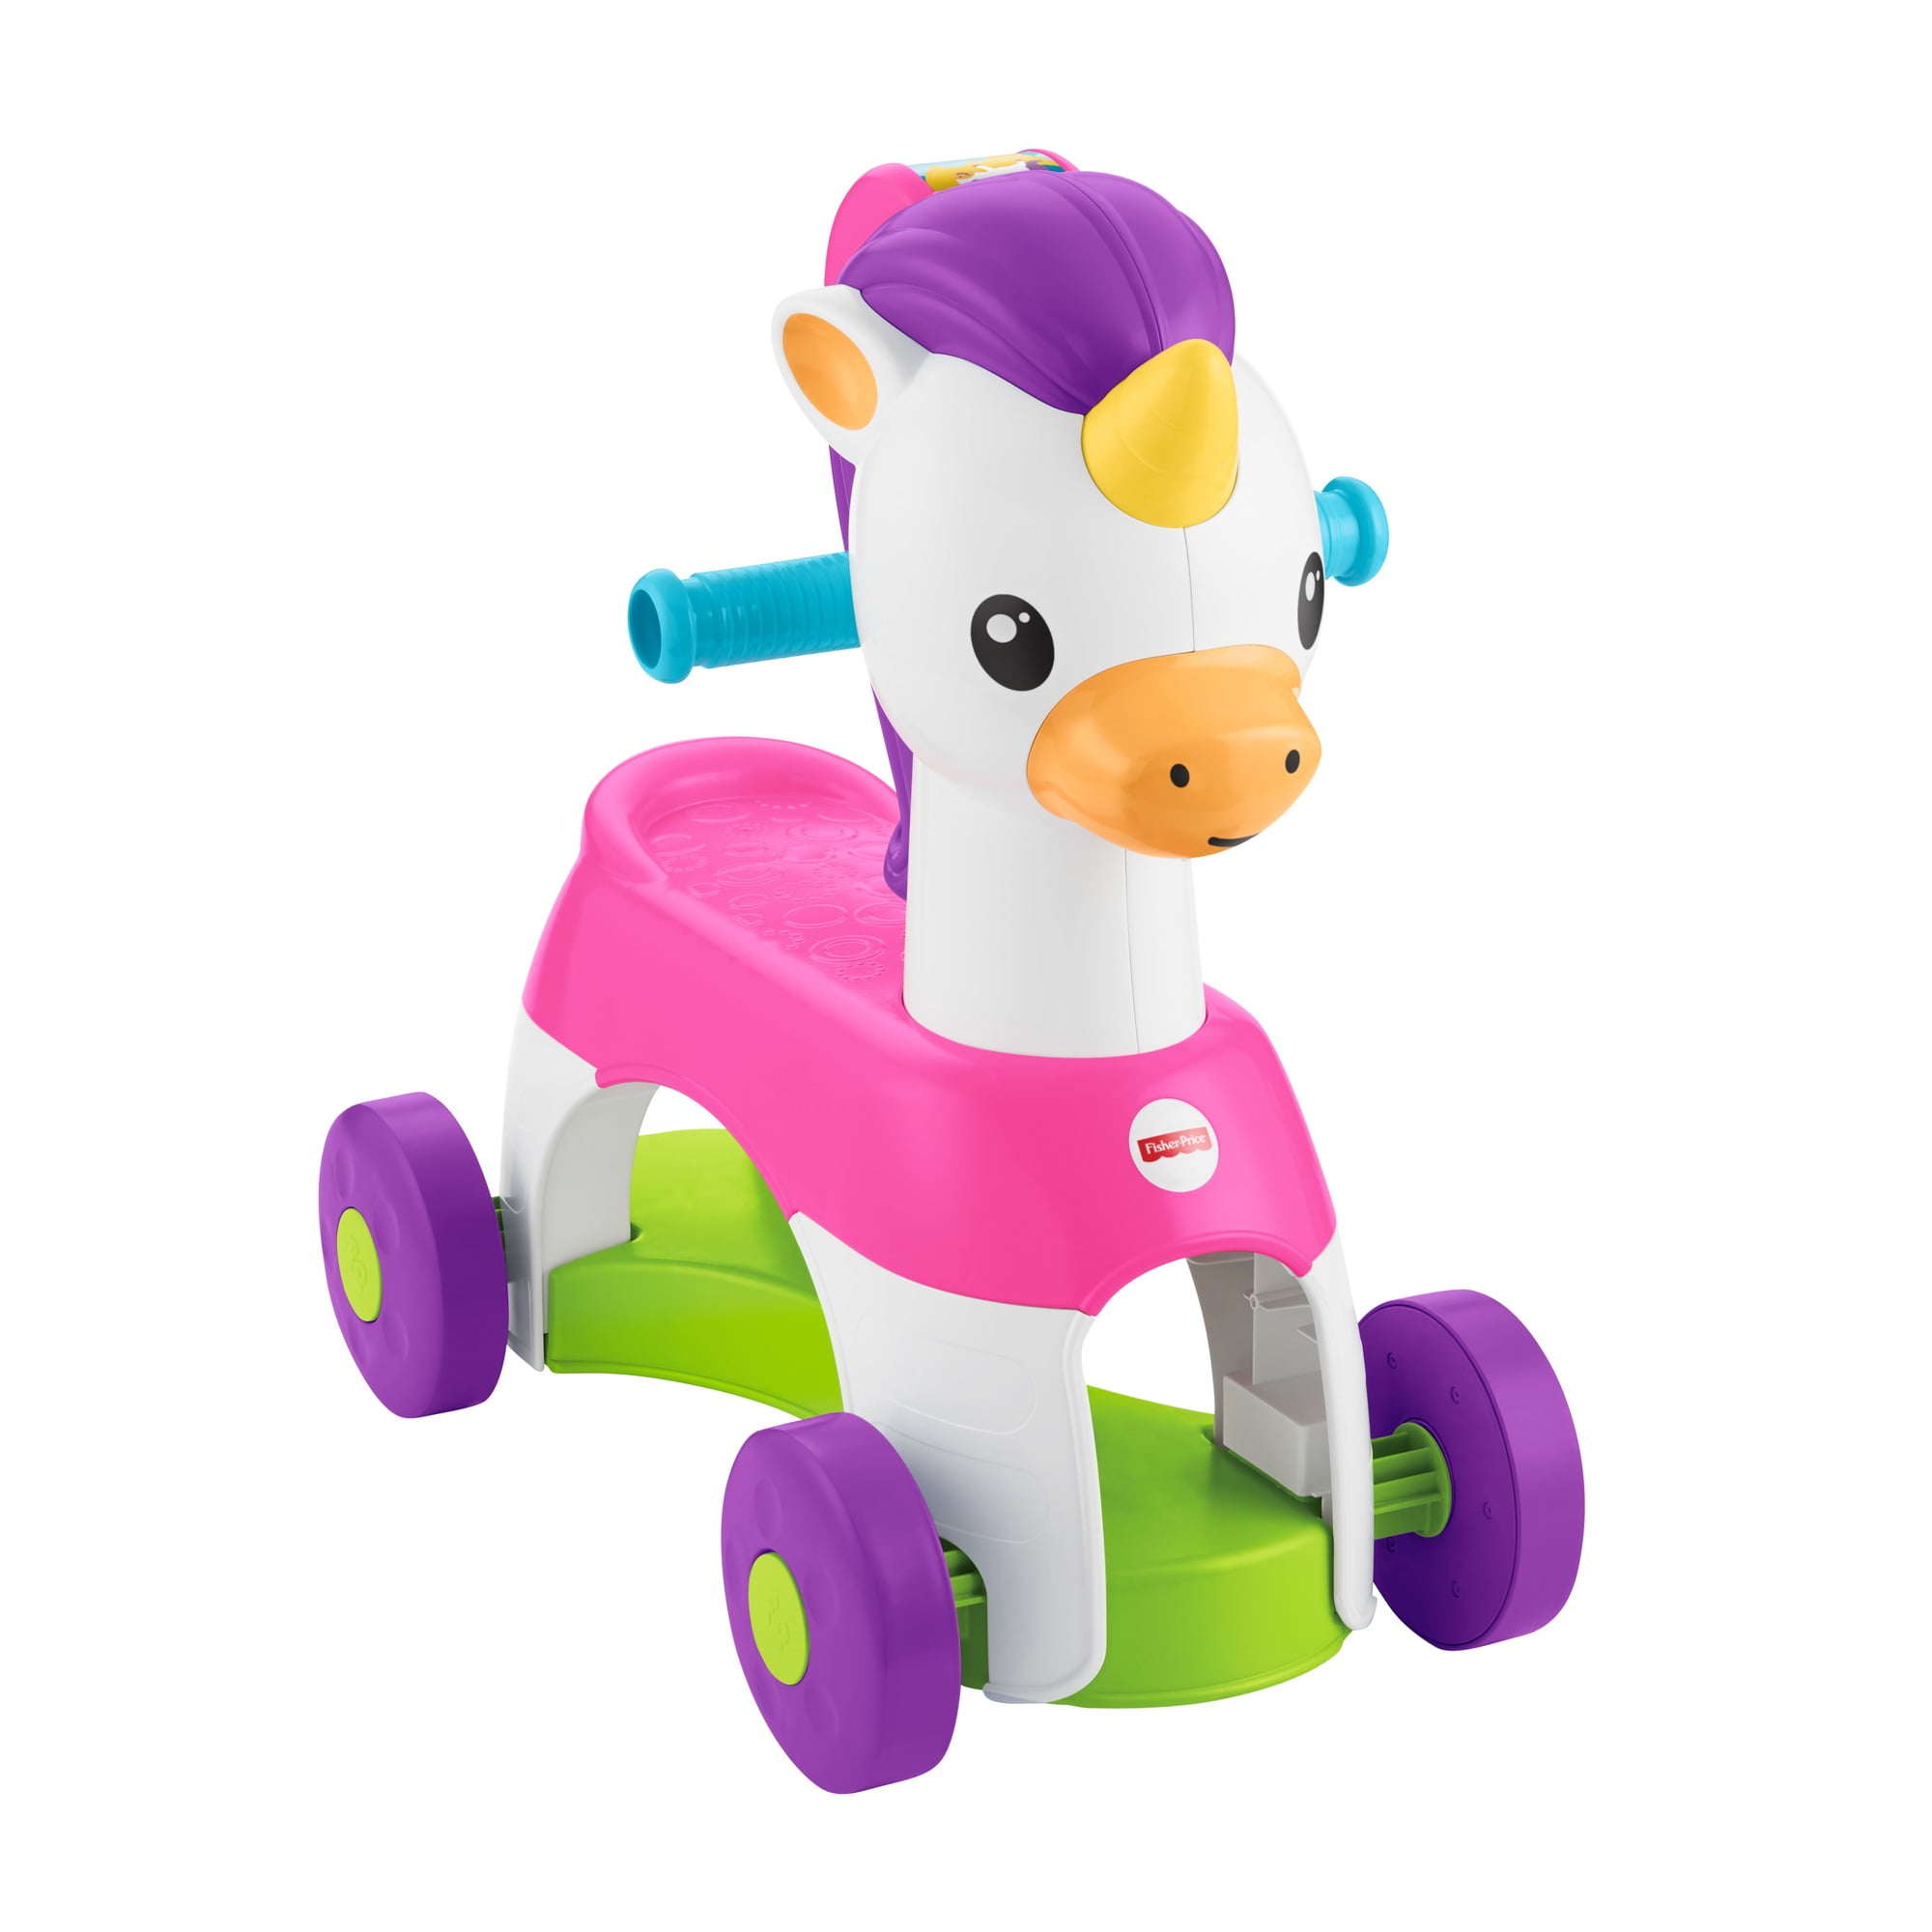 baby ride toys